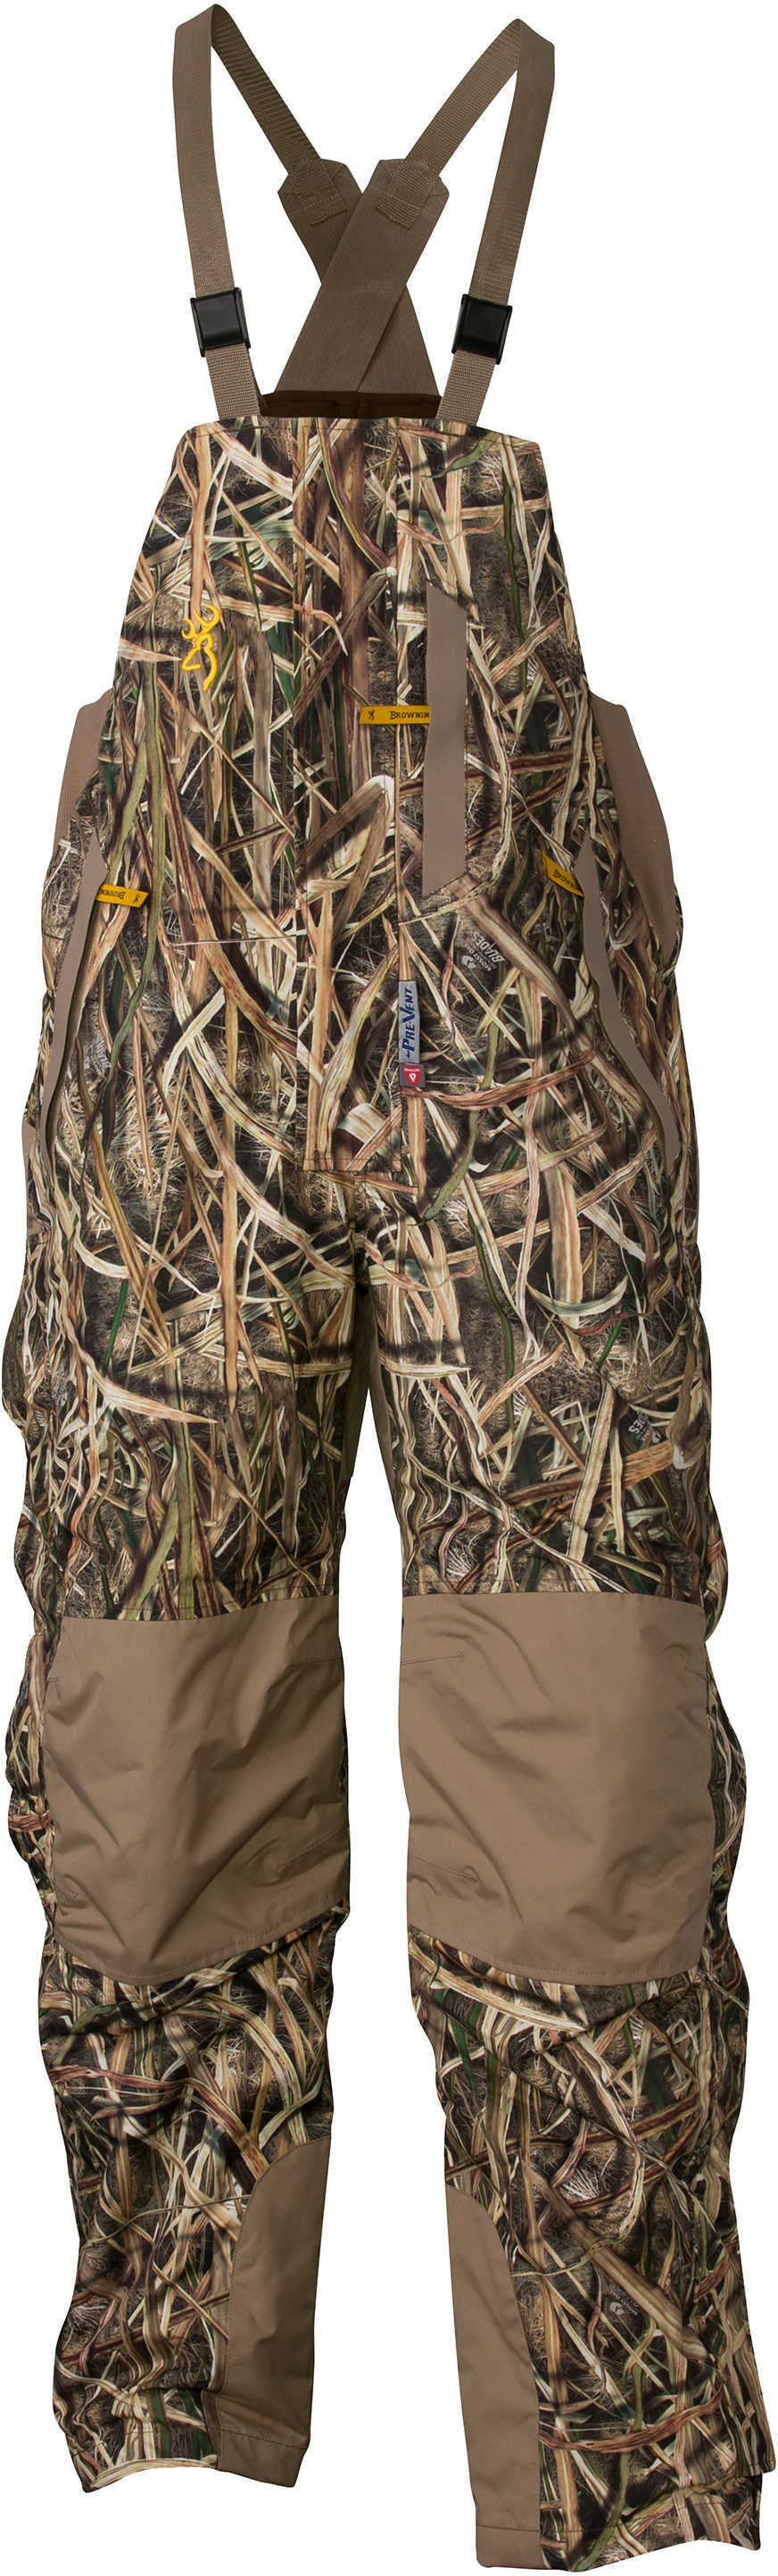 Browning Wicked Wing Insulated Bib Mossy Oak Shadow Grass Blades, Small Md: 3063122501